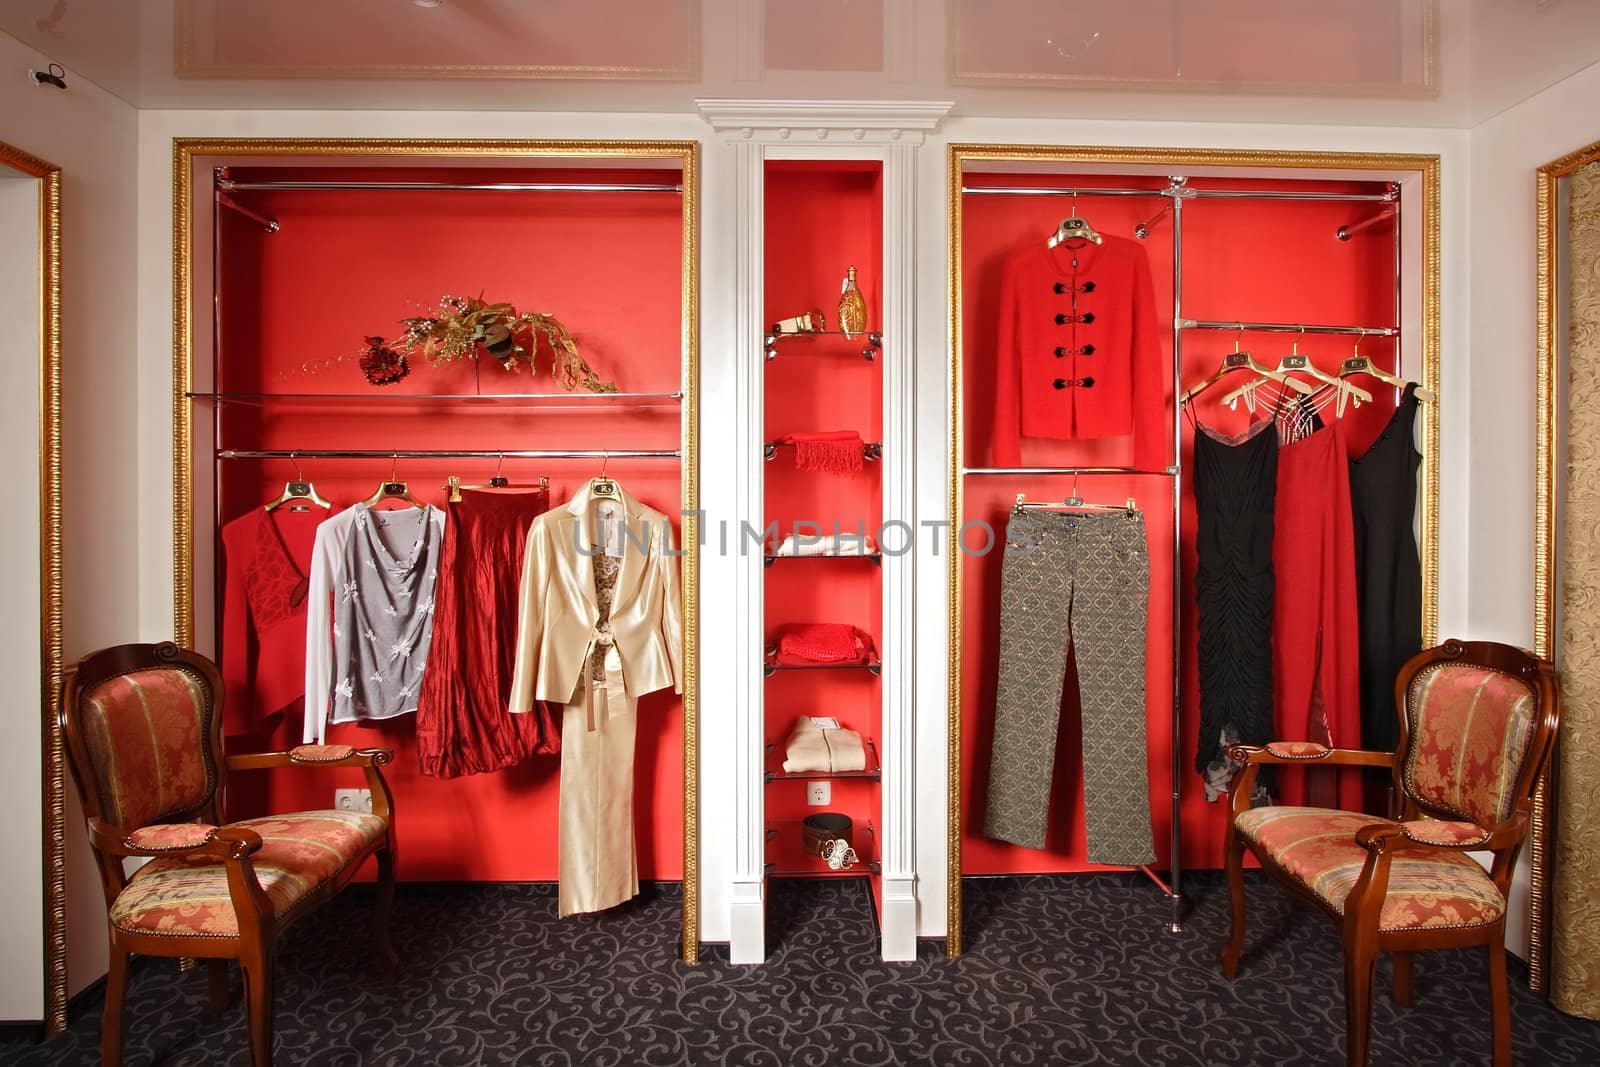 Interior of a fashionable boutique
